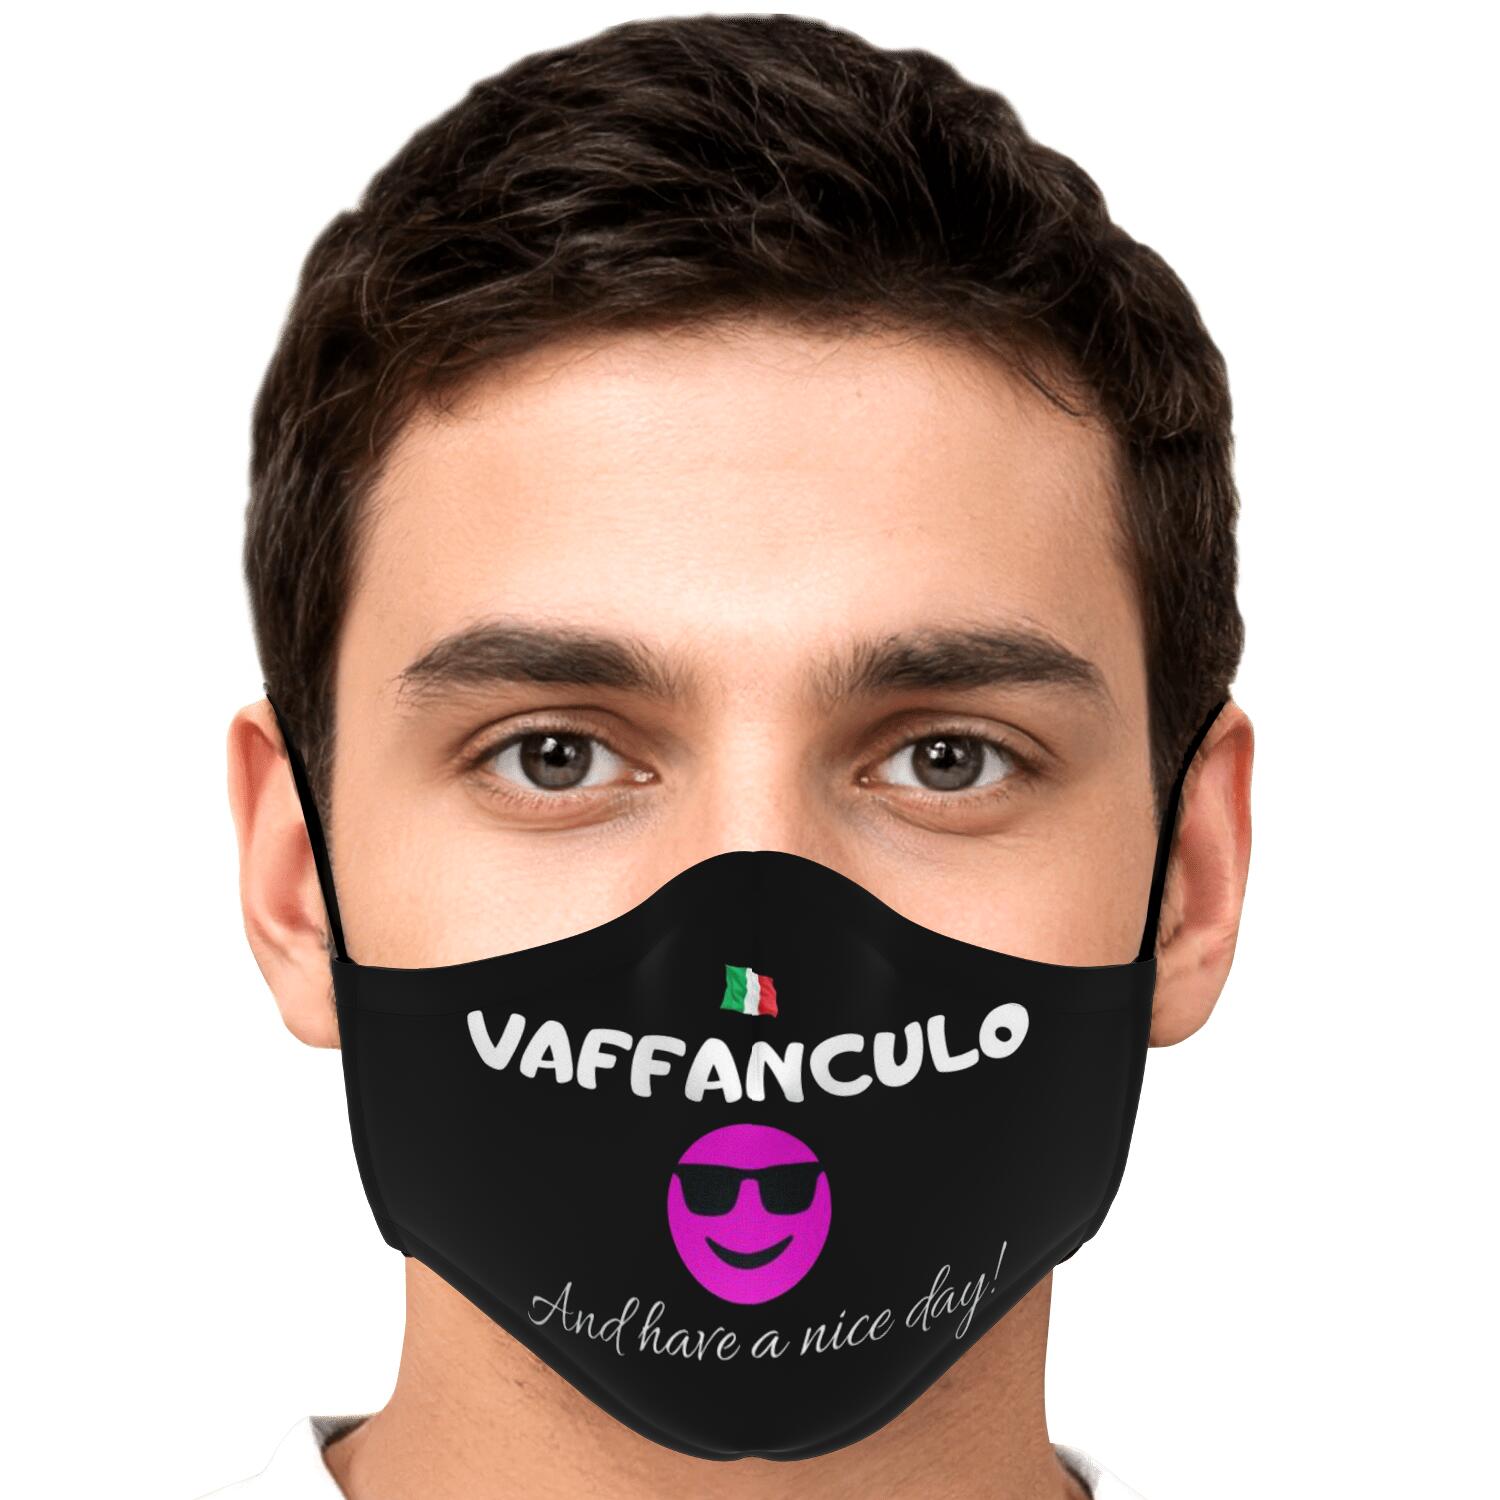 Vaffanculo And Have A Nice Day Face Mask + 2 PM 2.5 Filters